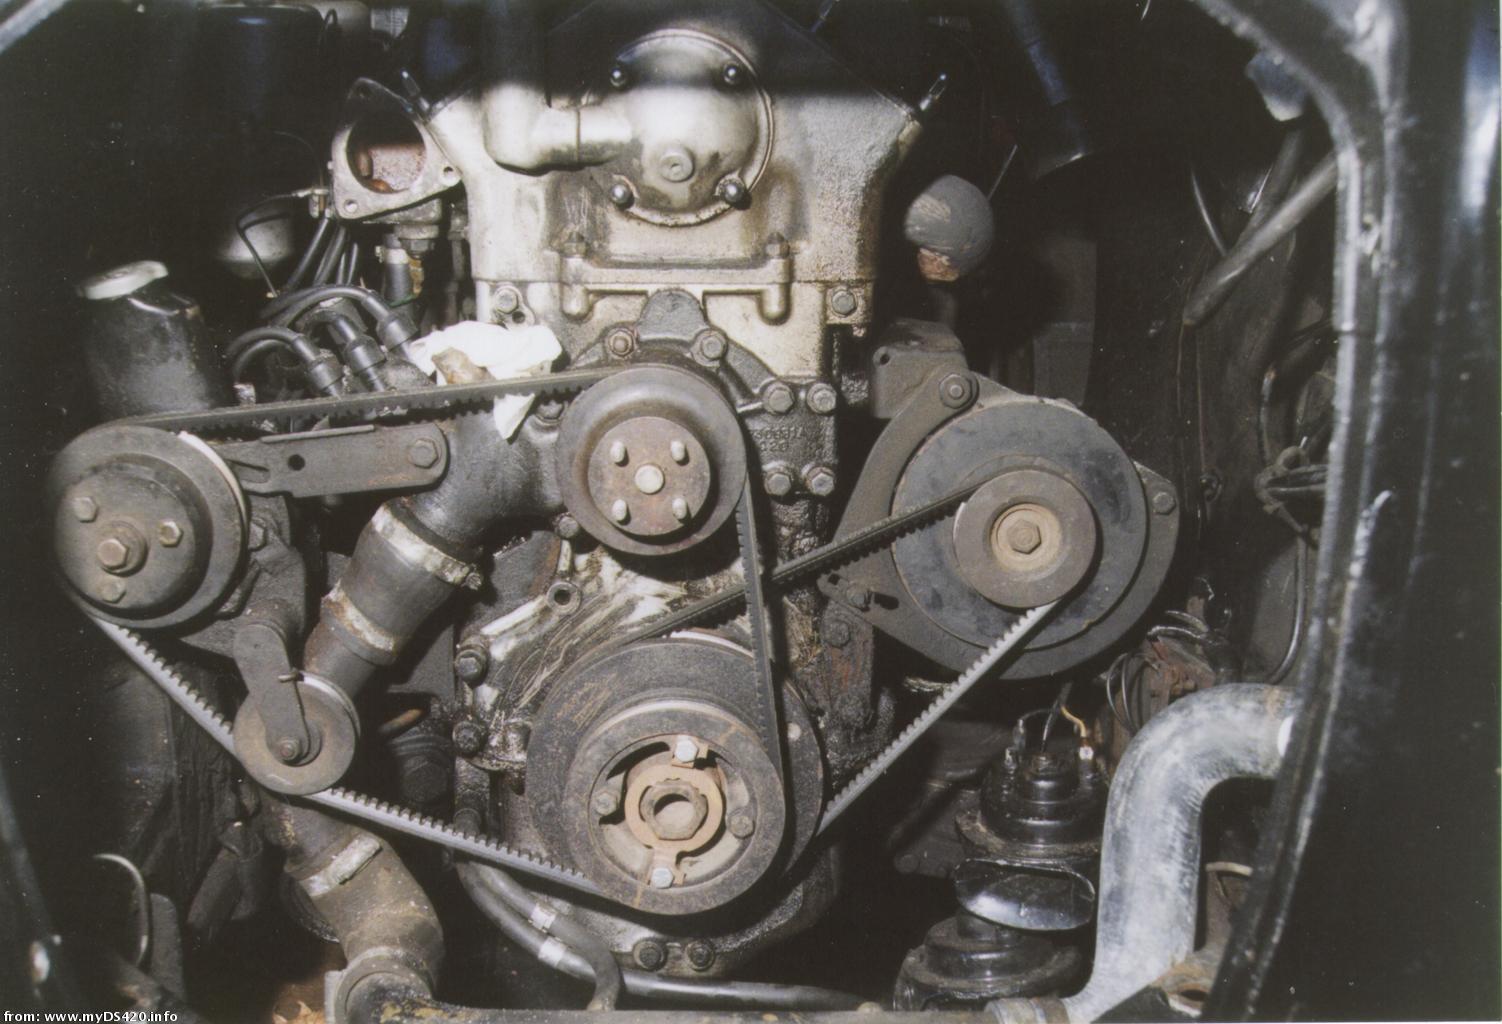 engine front view enginefront